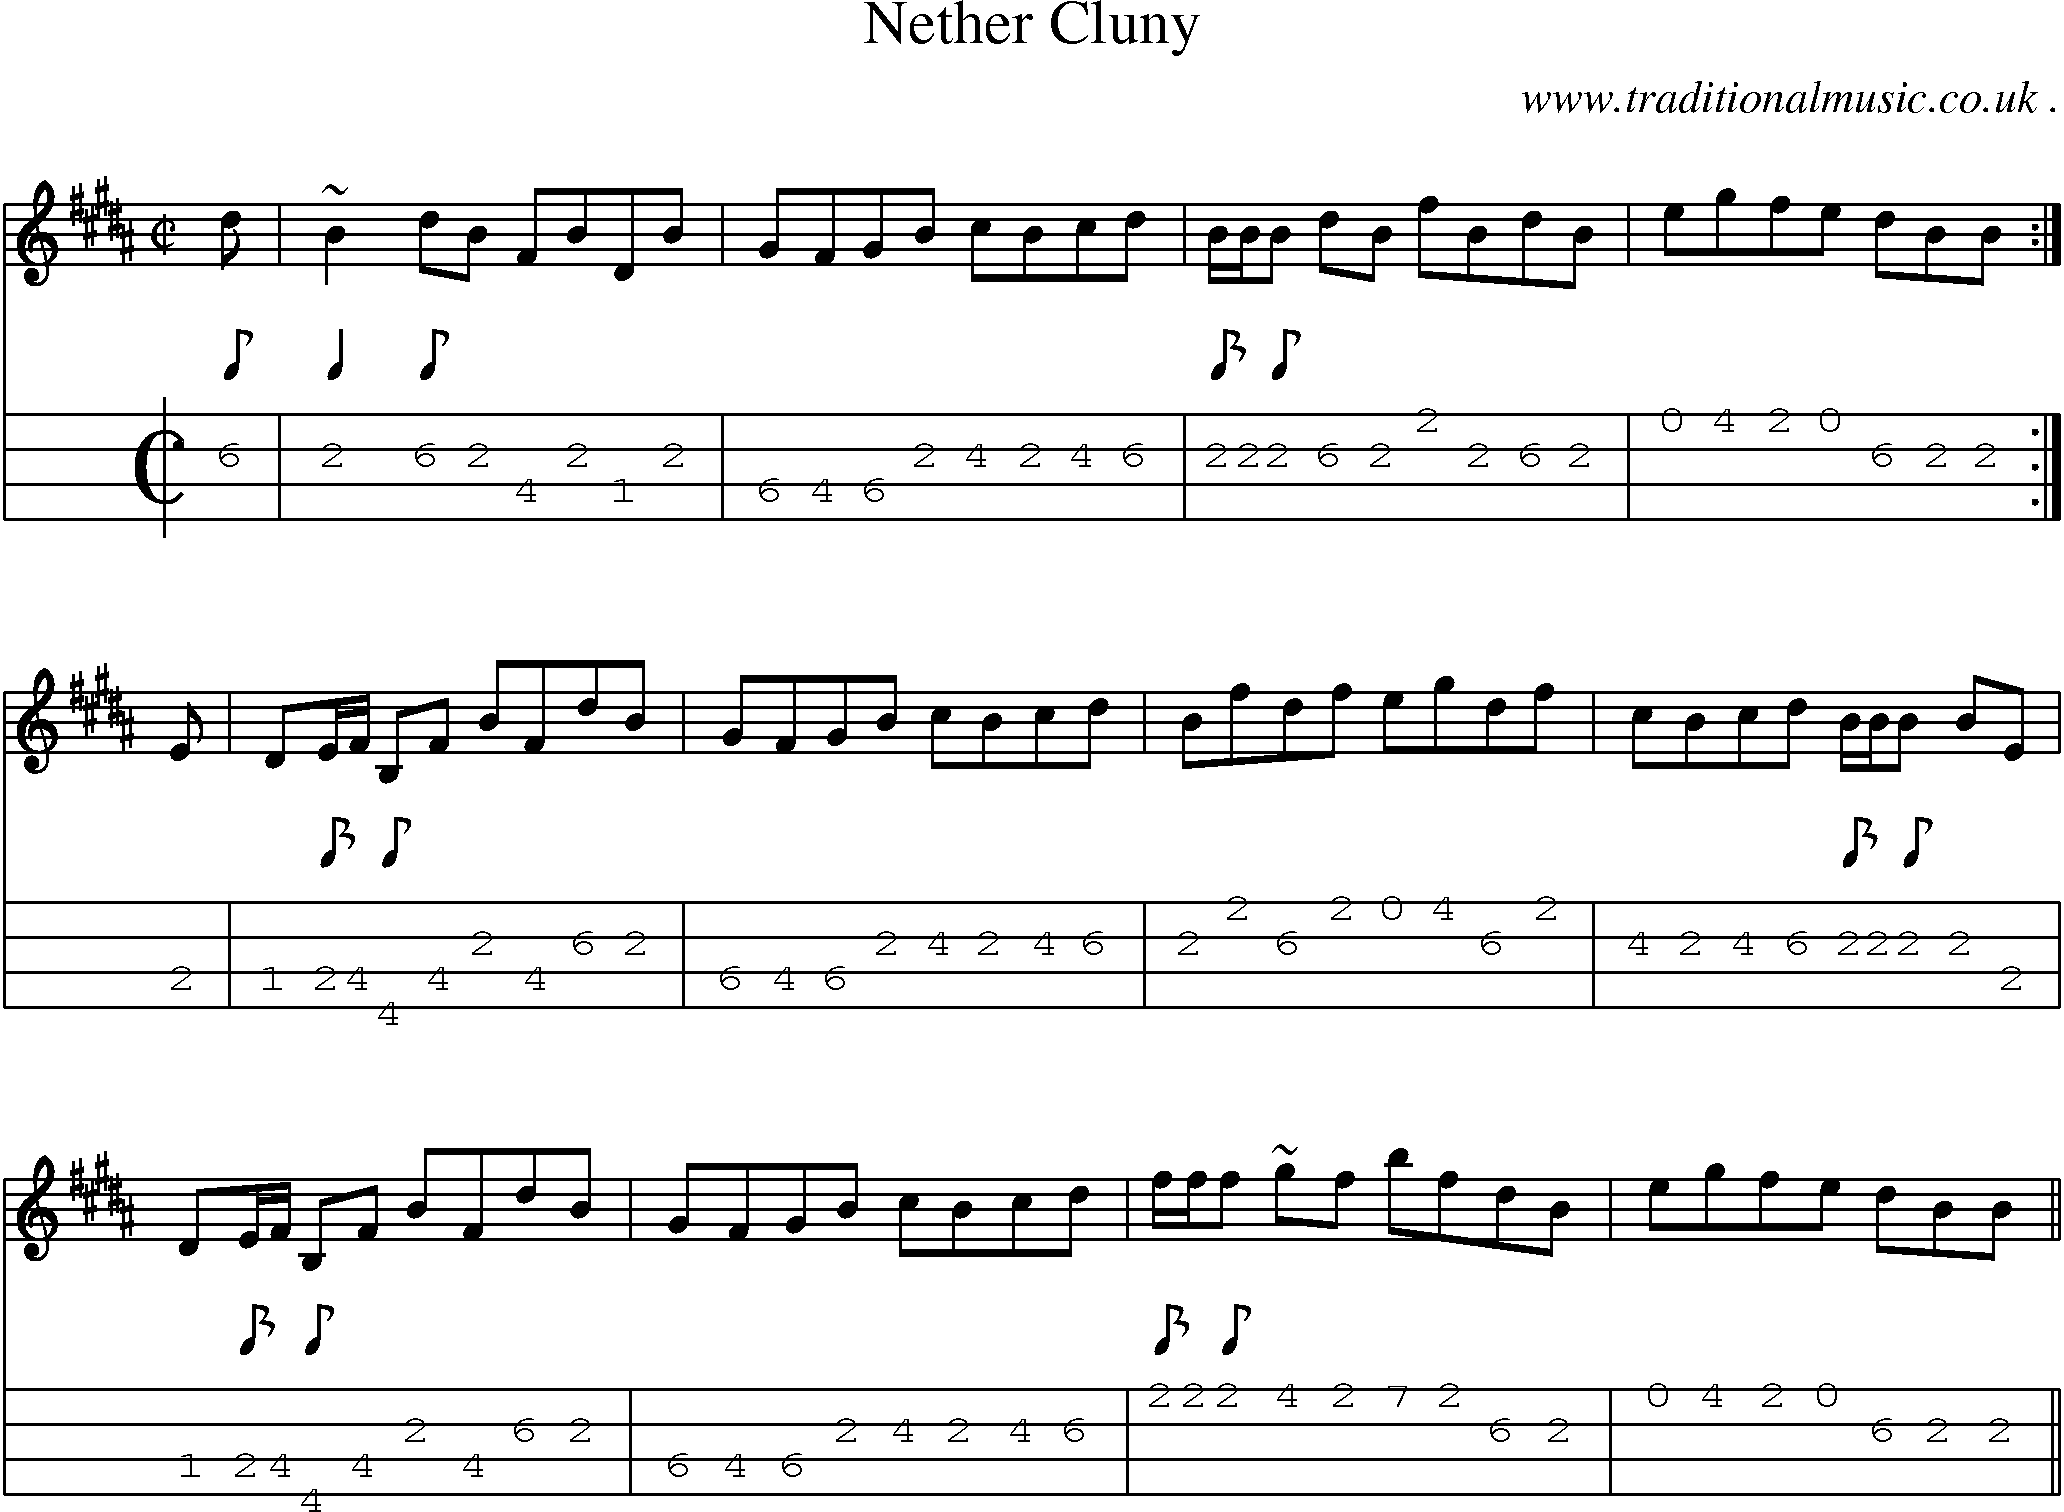 Sheet-music  score, Chords and Mandolin Tabs for Nether Cluny